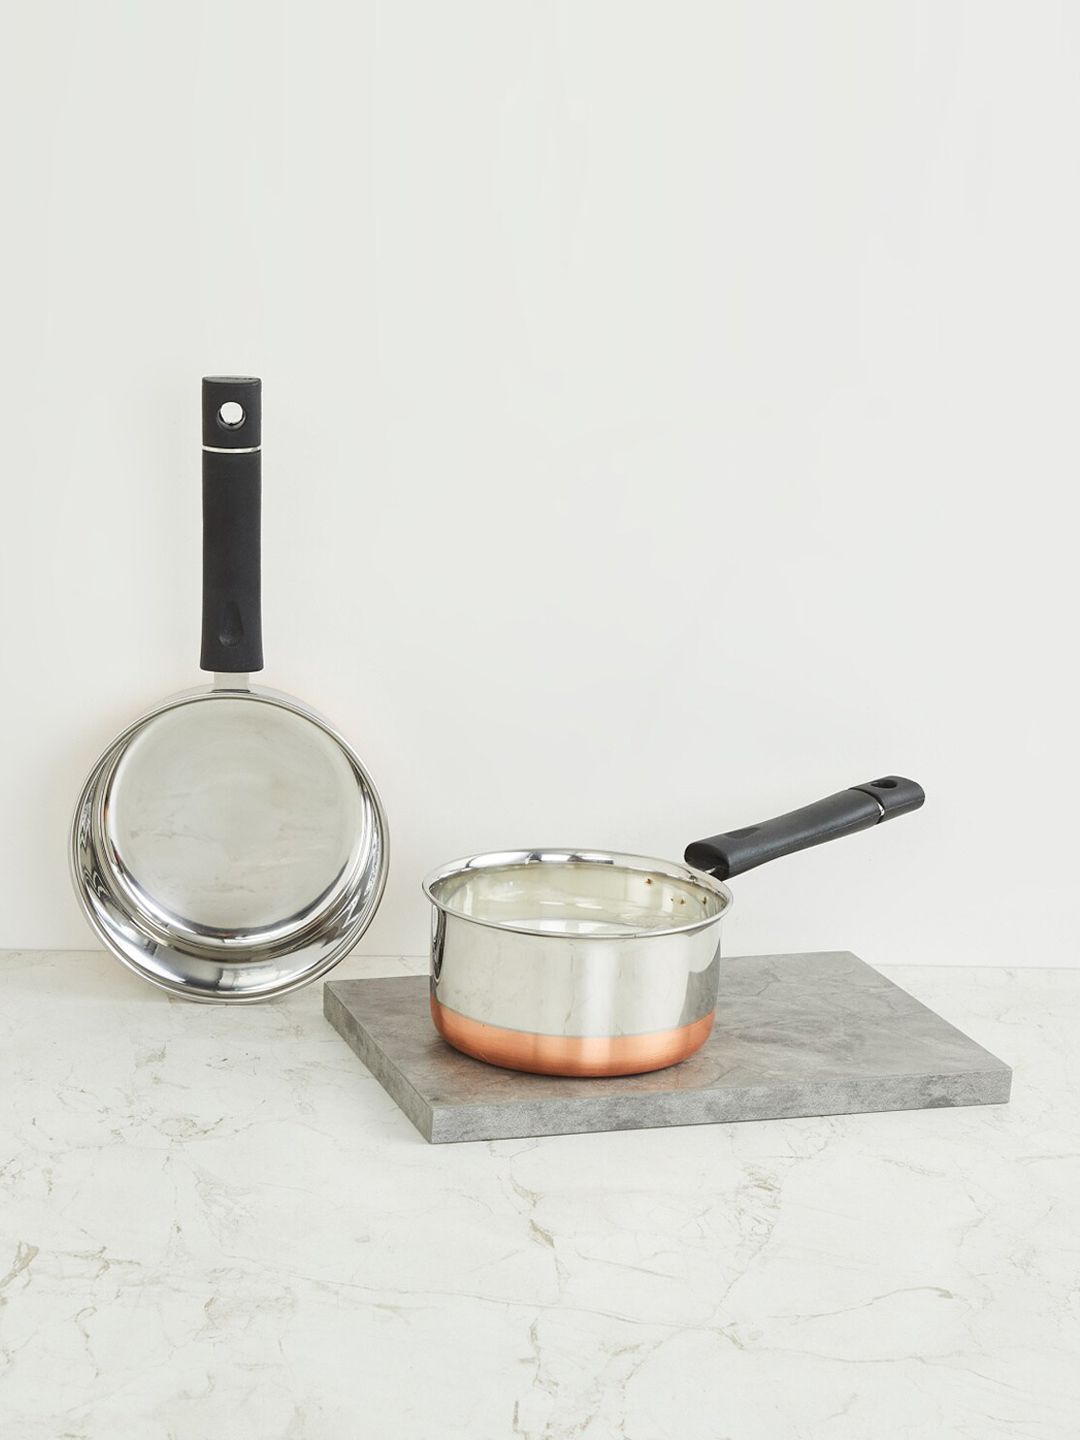 Home Centre Set Of 2 Silver-Toned & Copper-Toned Stainless Steel Sauce Pans Price in India